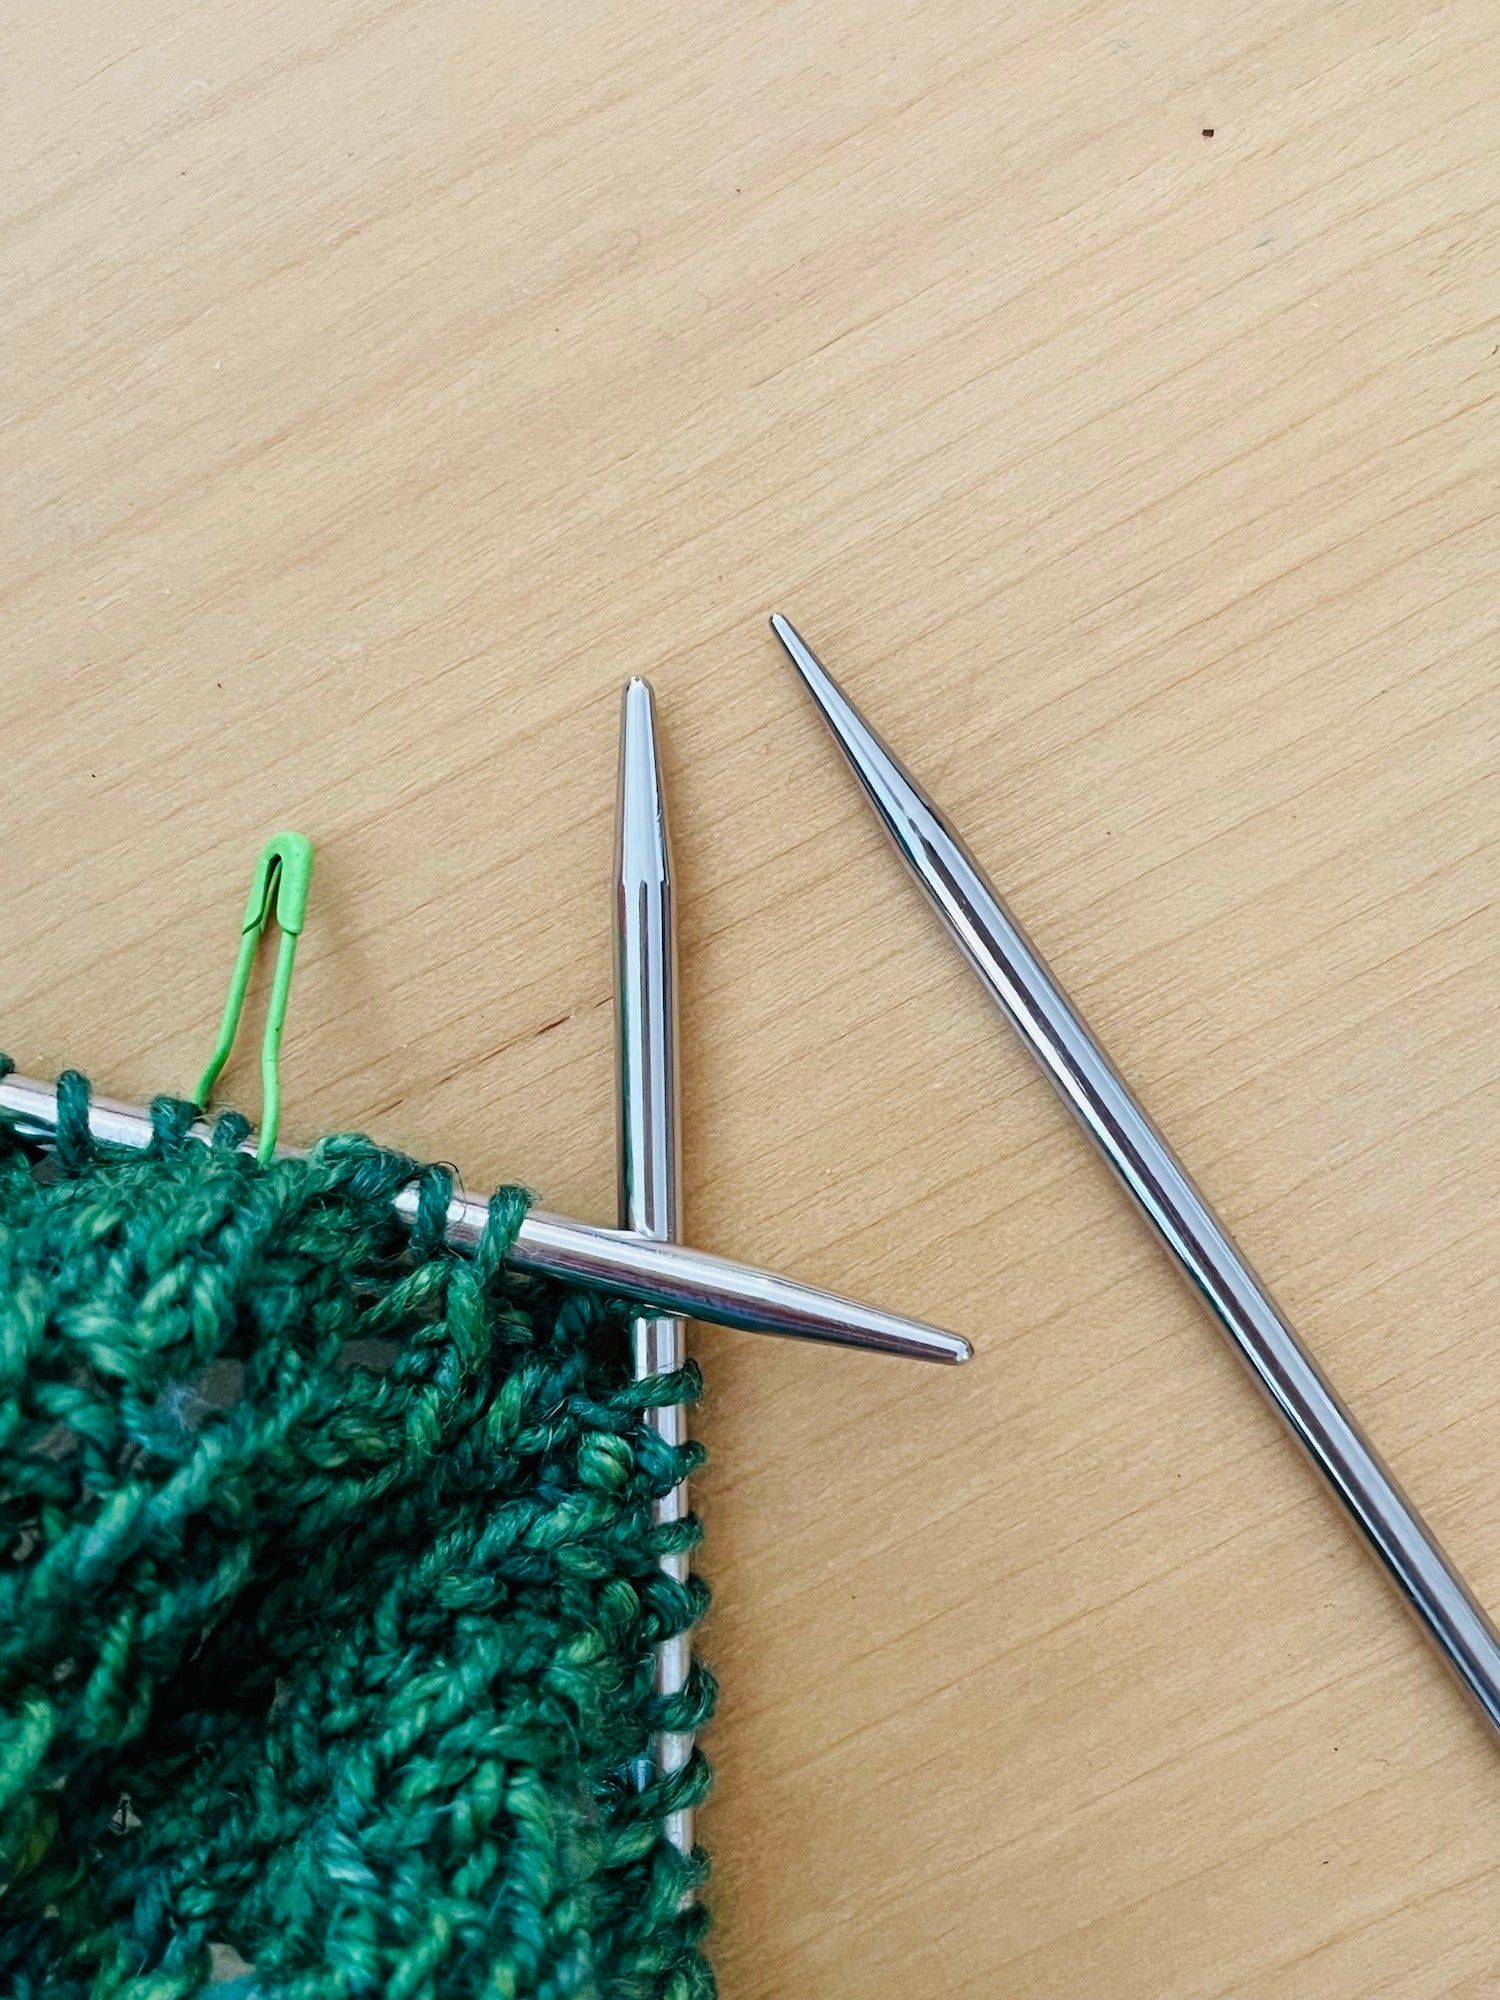 Are your knitting needles too pointy or not pointy enough?